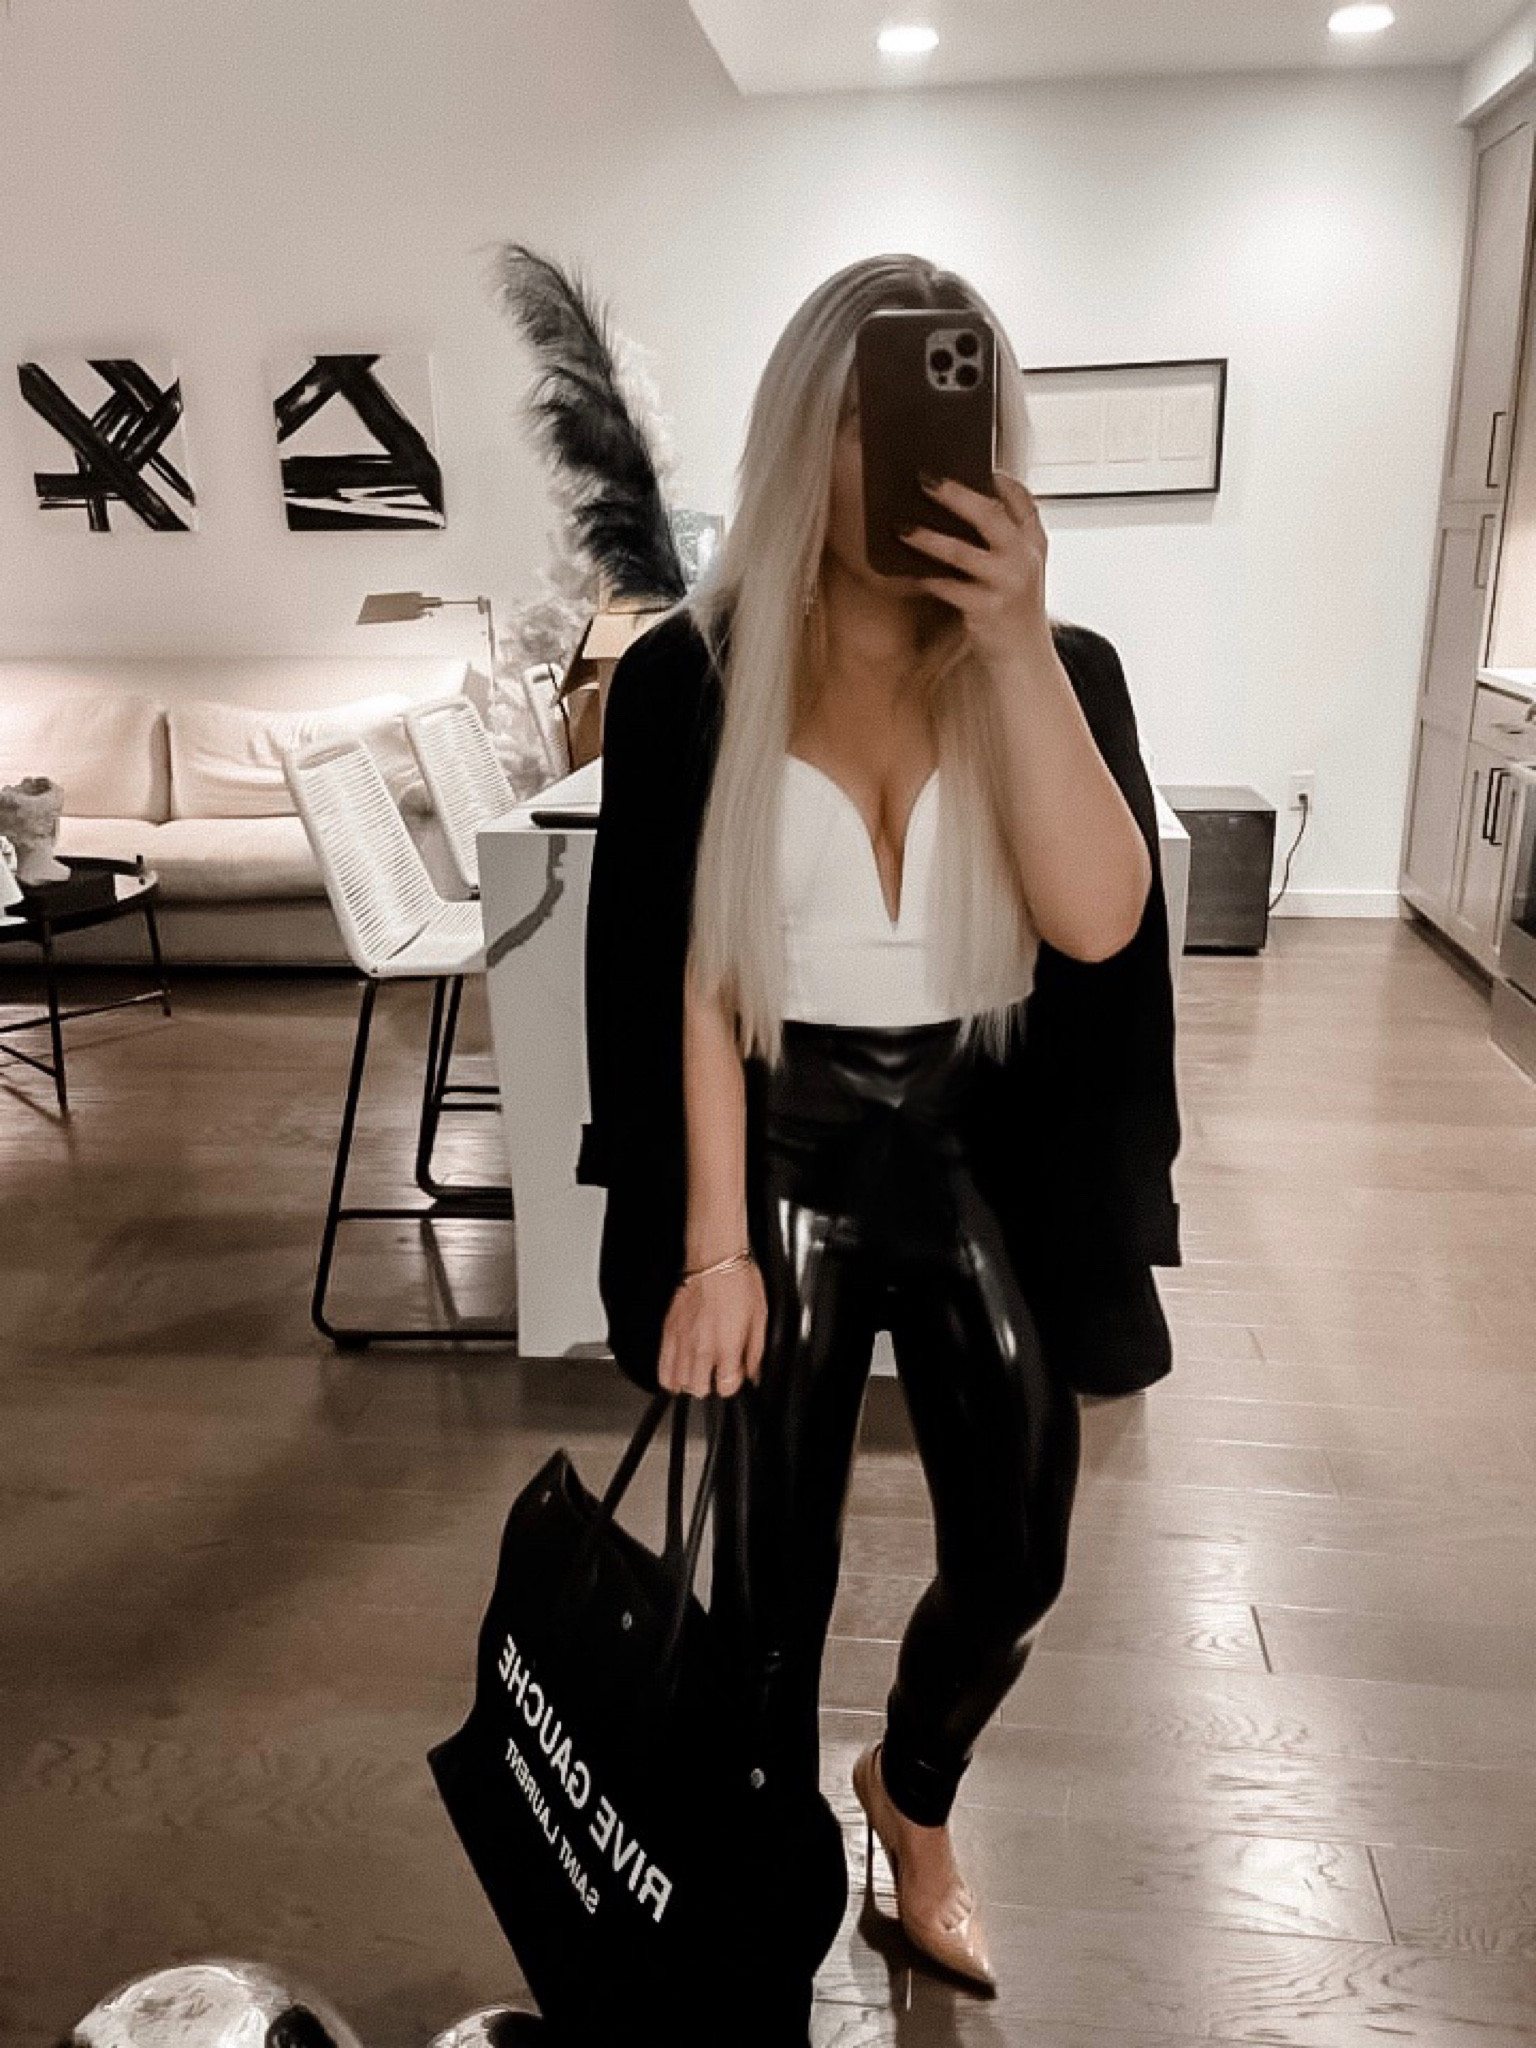 Patent leather leggings have now entered the chat. 🖤 I'm so